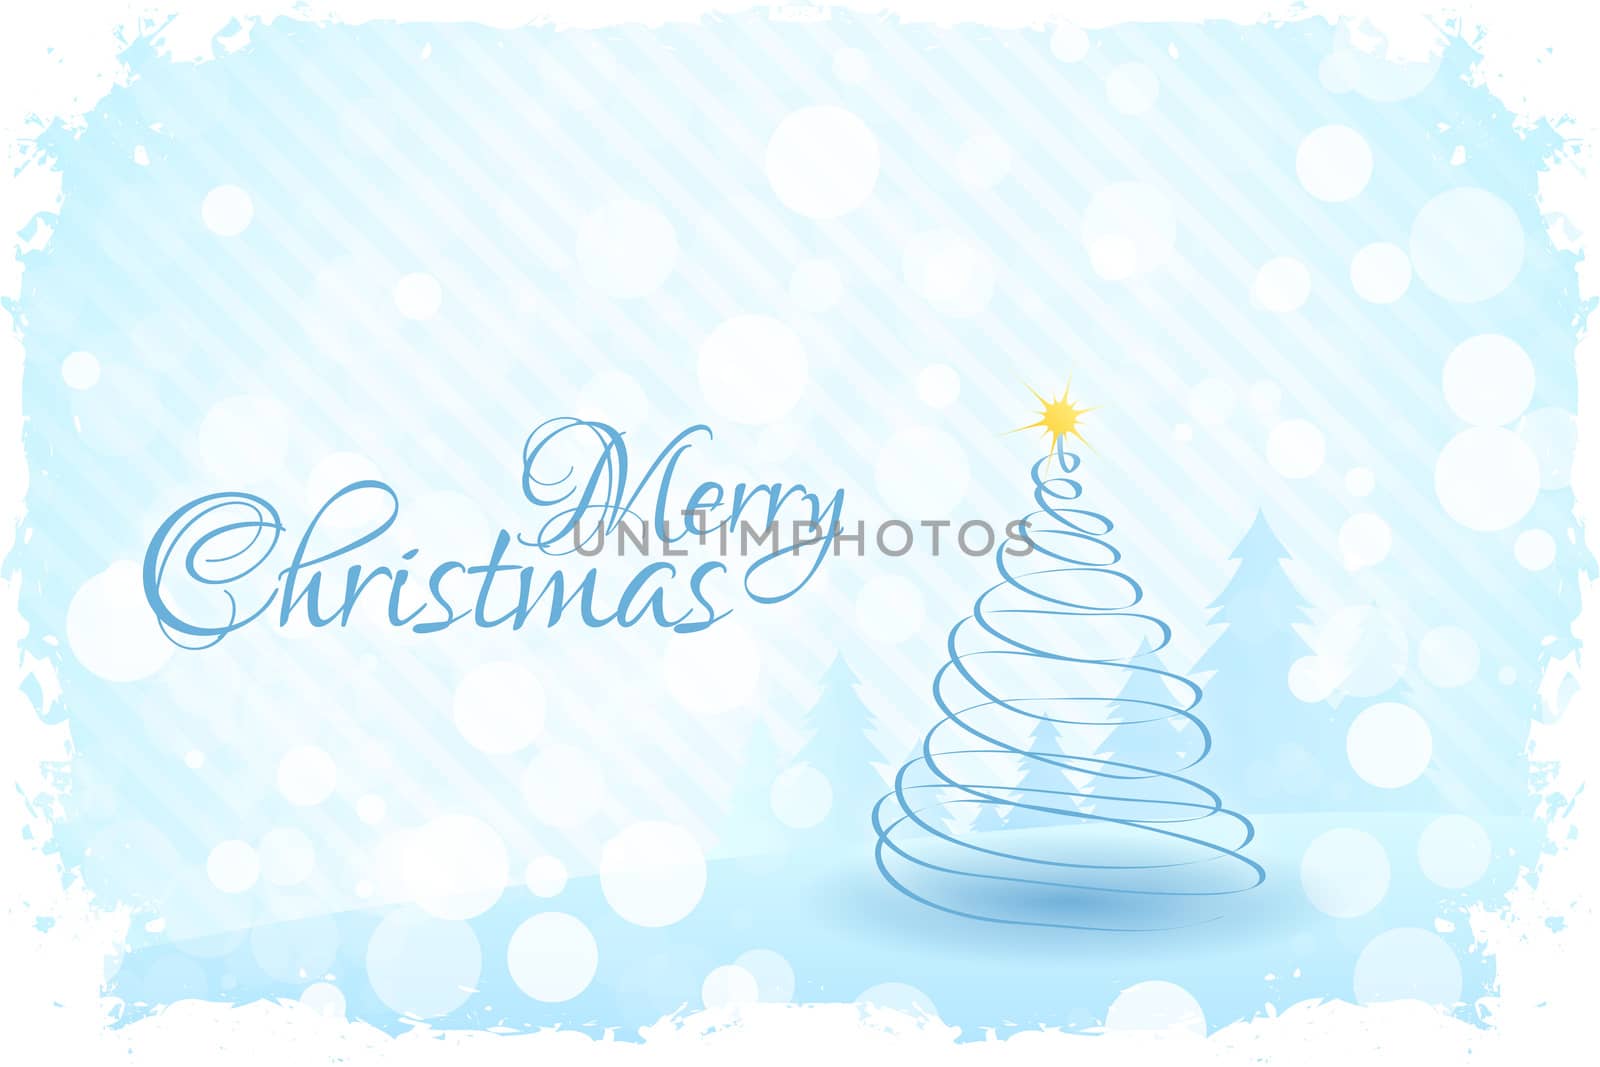 Grungy Christmas Card with Christmas Tree and Star